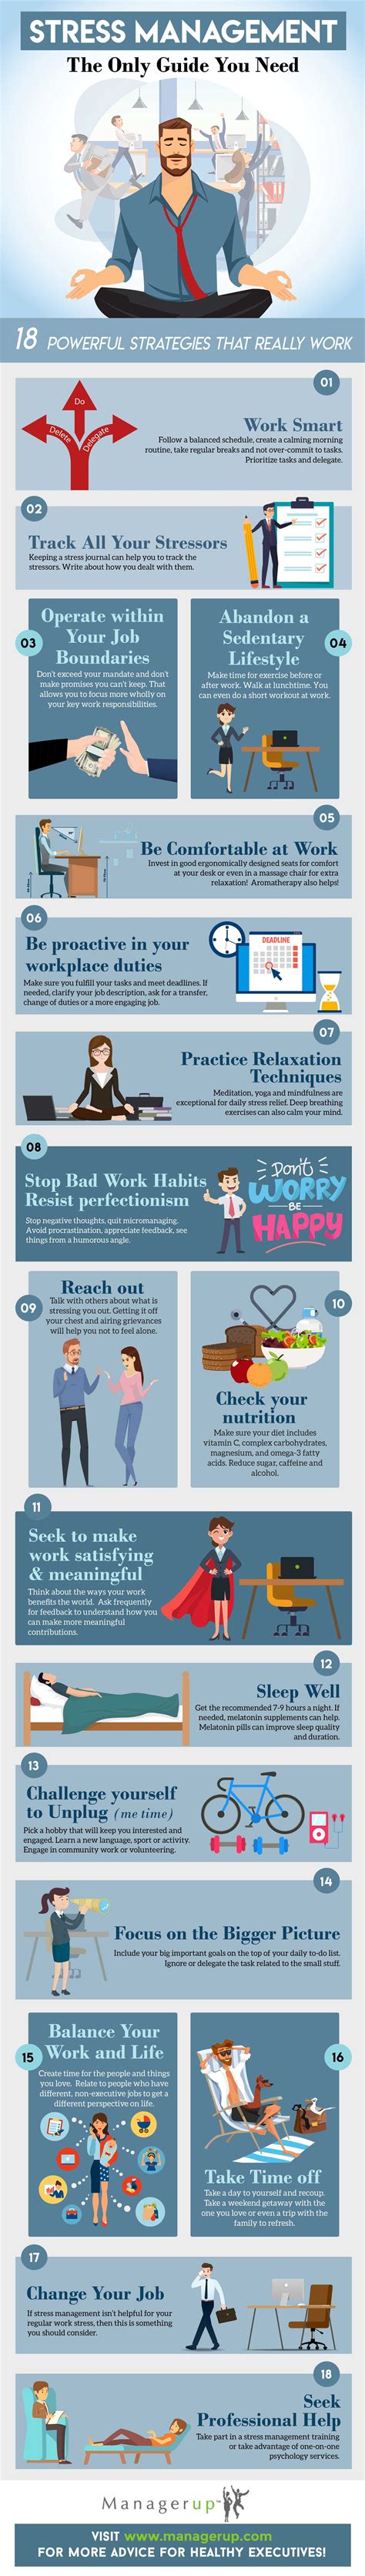 Stress Management Infographic ManagerUp